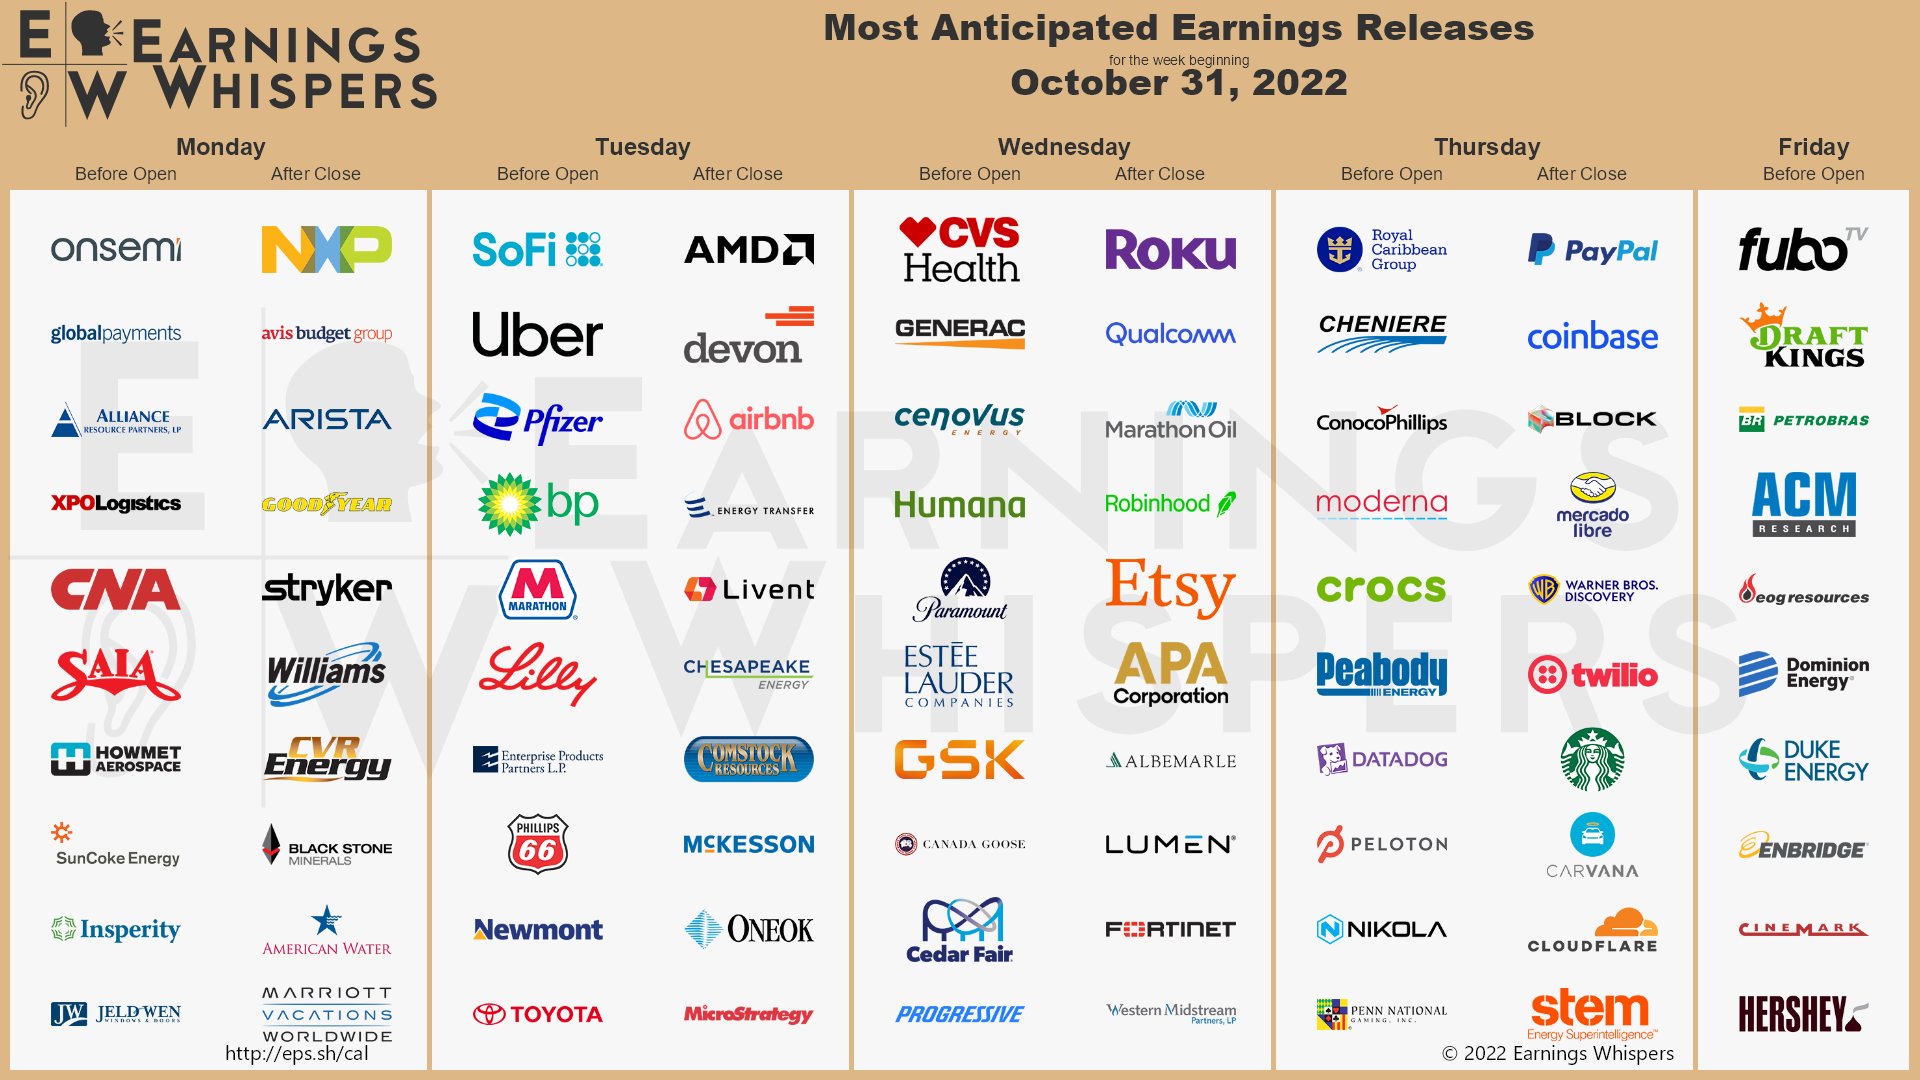 The most anticipated earnings releases scheduled for the week are AMD #AMD, SoFi #SOFI, Uber #UBER, onsemi #ON, Roku #ROKU, Pfizer #PFE, PayPal #PYPL, Devon Energy #DVN, Airbnb #ABNB, and BP #BP.